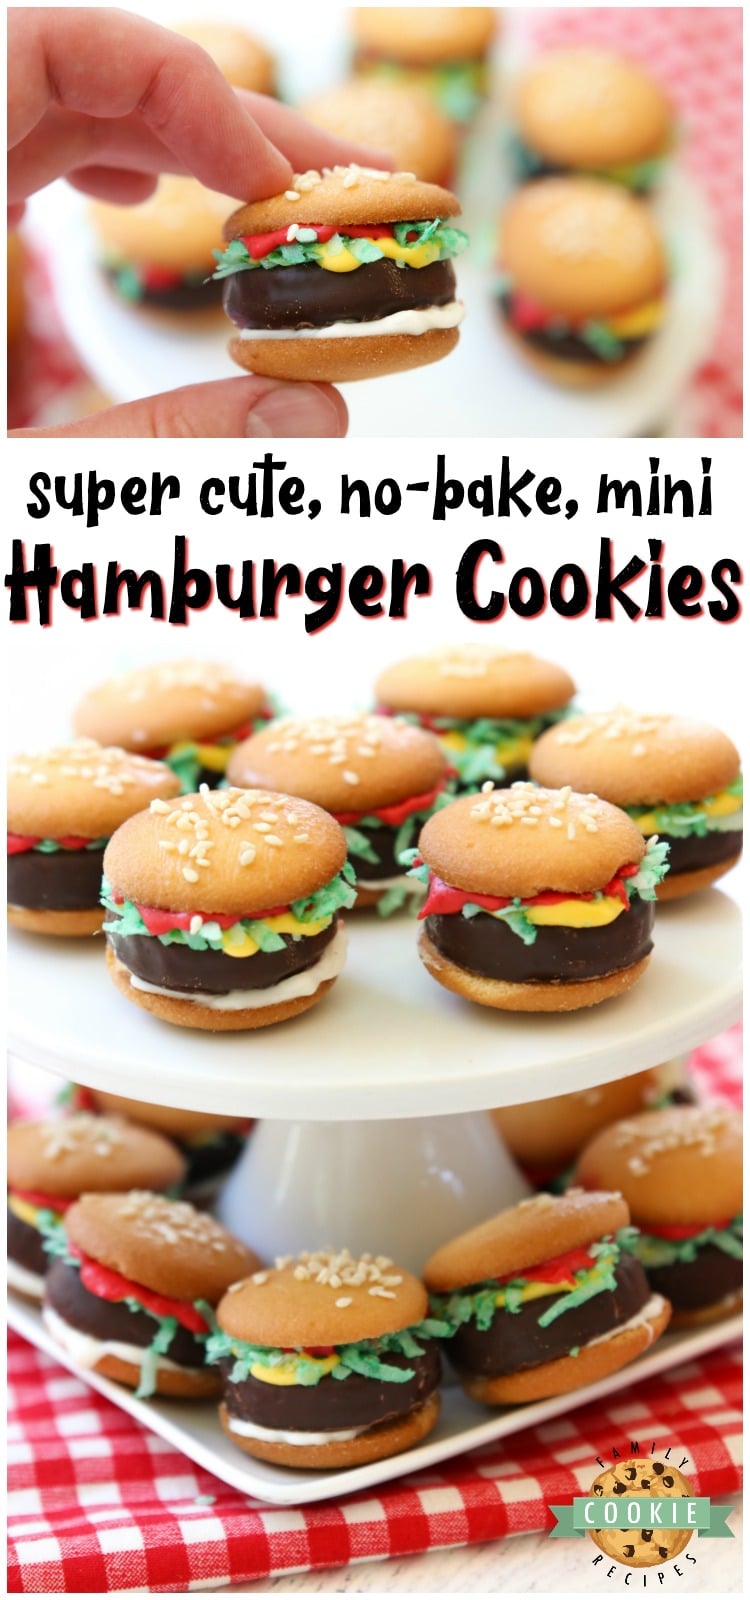 Mini Hamburger Cookies made from Nilla Wafers, York Peppermint Patties and melted candy! Super cute no-bake hamburger cookies that kids go crazy over! via @buttergirls